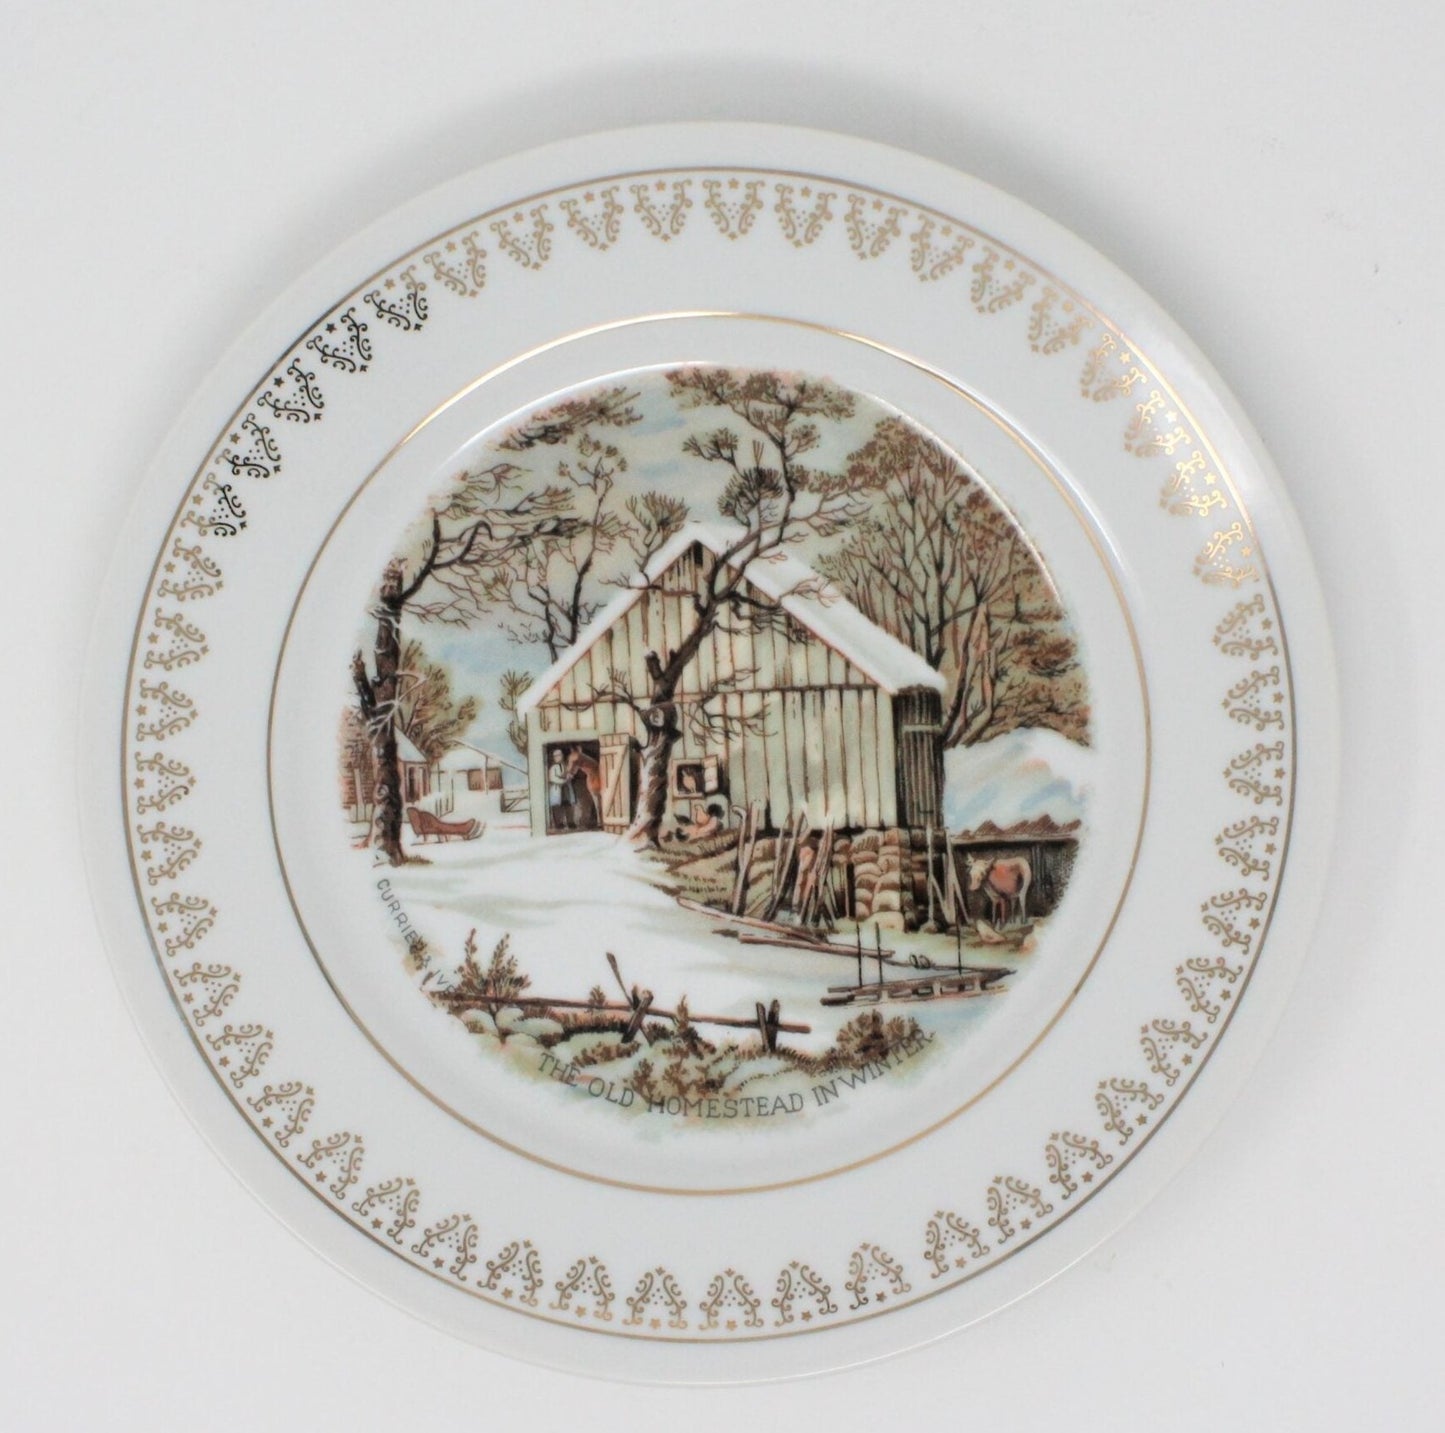 Decorative Plate, Currier & Ives, Roy Thomas, Old Homestead In Winter, Vintage